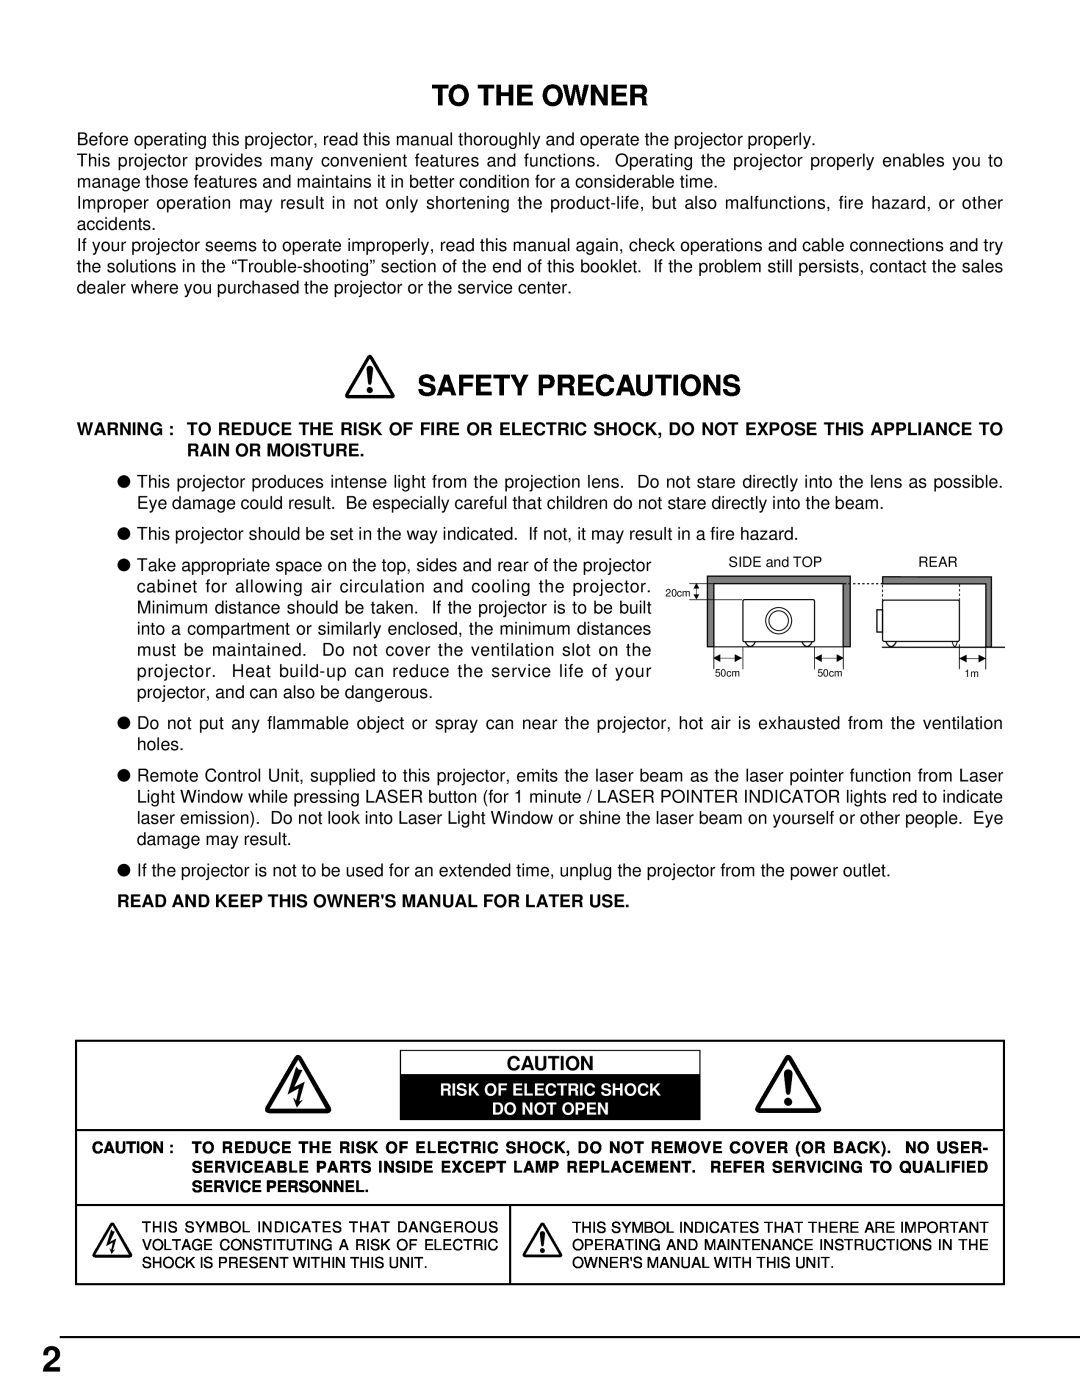 Eiki LC-UXT1 instruction manual To The Owner, Safety Precautions, Read And Keep This Owners Manual For Later Use 